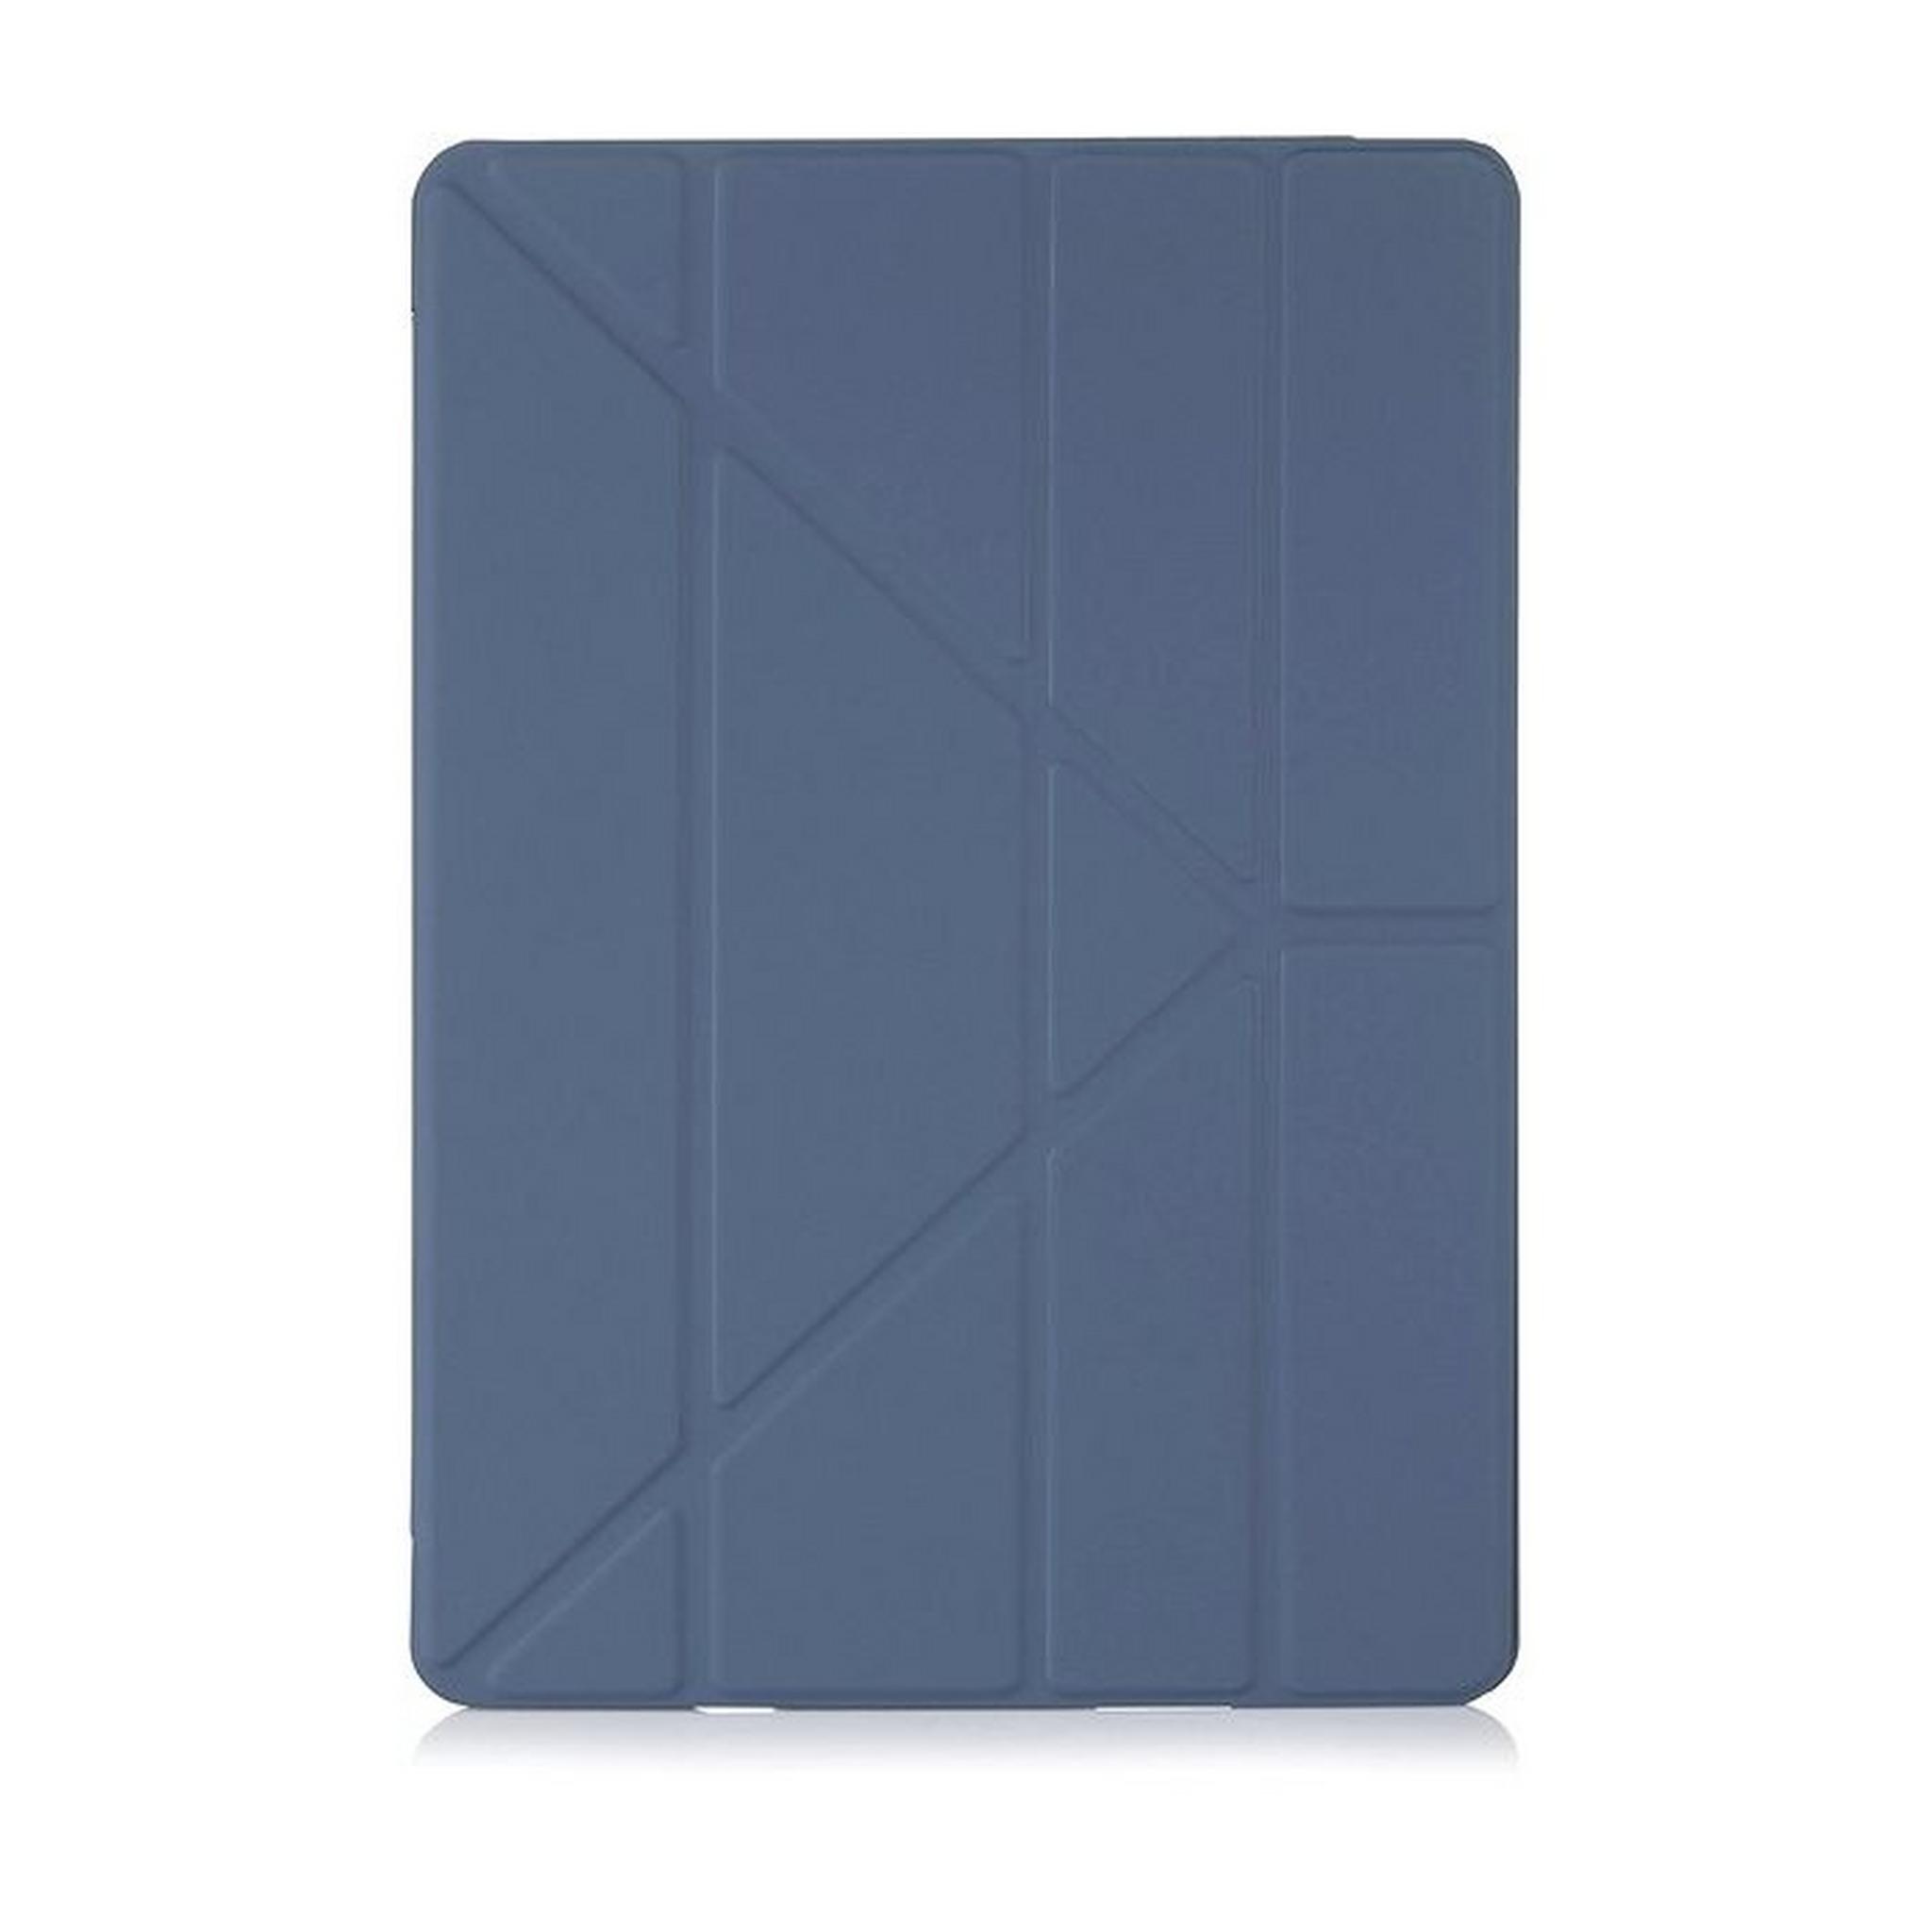 Pipetto Origami Folding Case and Stand For iPad 9.7-inch (P030-51-4) - Navy